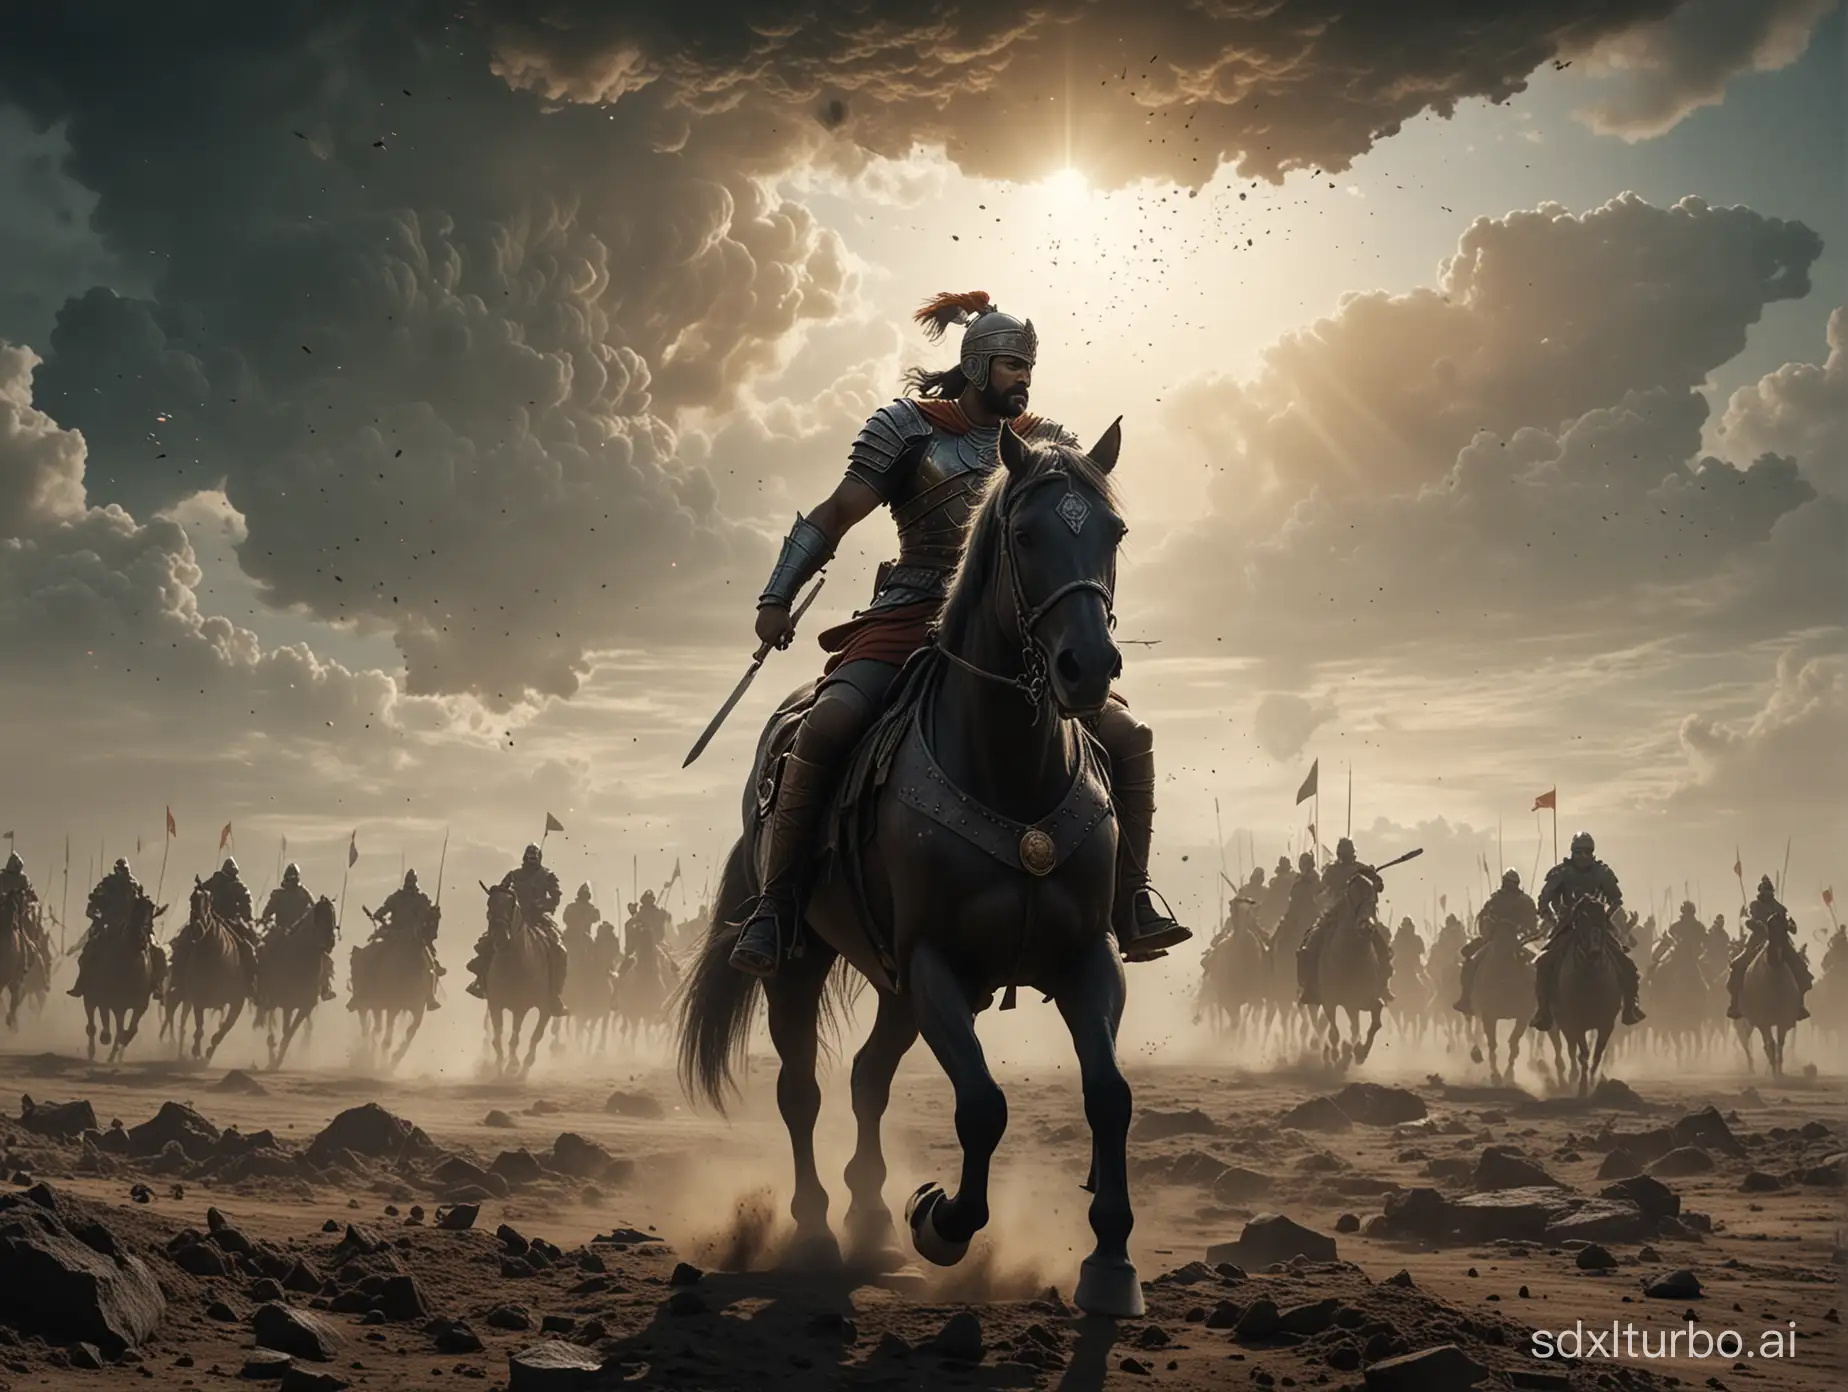 a wide shot of an Indian medieval battlefield, where Maratha troops, led by a superheroic leader, are engaged in a fierce clash with enemy soldiers. The leader, reminiscent of Superman, is depicted flying through the sky with hands aglow with cosmic energy. He exudes power and authority as he manipulates the gravity around him, causing enemy soldiers and their horses to float helplessly in the air.
The scene is bathed in Zack Snyder's trademark cinematic style, with dark, grungy tones adding depth and atmosphere. Shot on Arri Alexa in 4K resolution, every detail of the battlefield is captured with stunning clarity, from the intricate armor of the warriors to the billowing dust clouds kicked up by their movements.